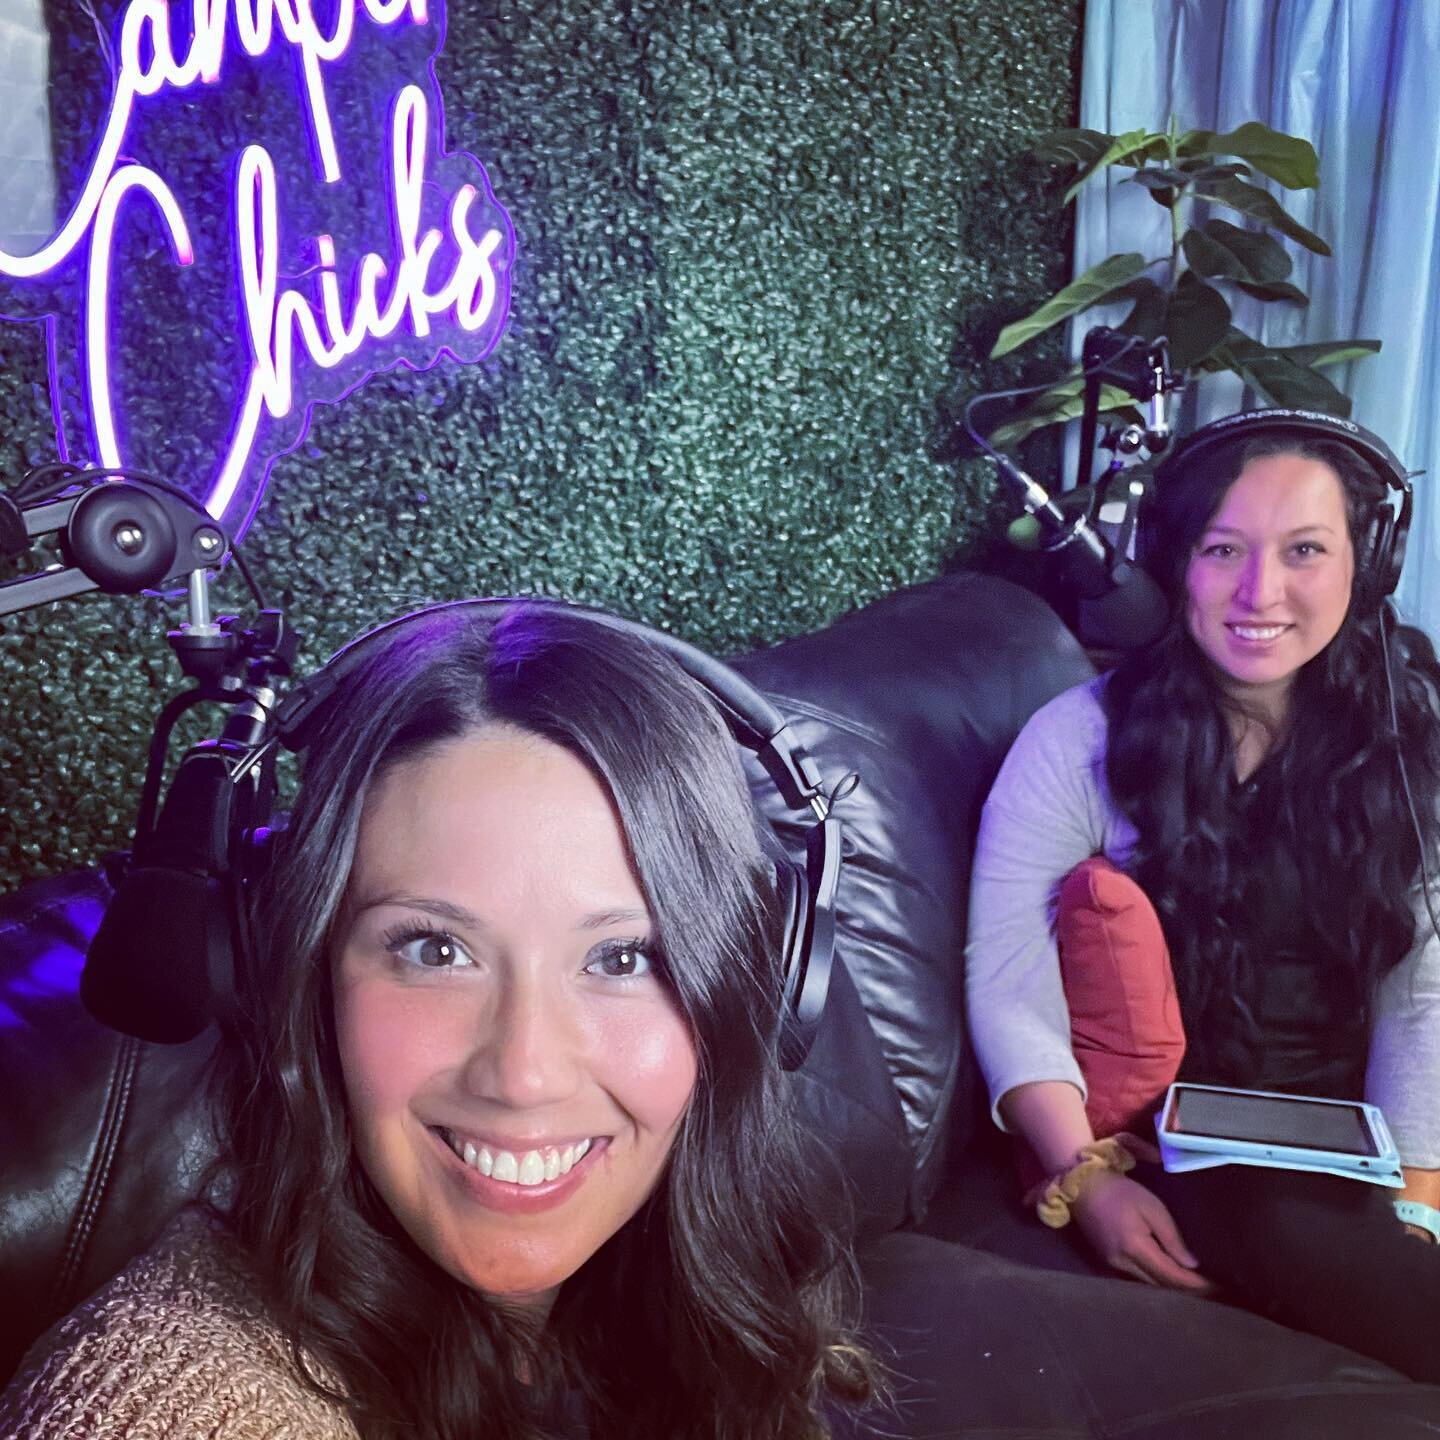 We accomplished our first podcast episode recording today, our introduction! We ran into some kinks and learning opportunities, but we can only grow from here! We&rsquo;re excited to start getting these pushed out for your viewing pleasure!
.
.
.
#po